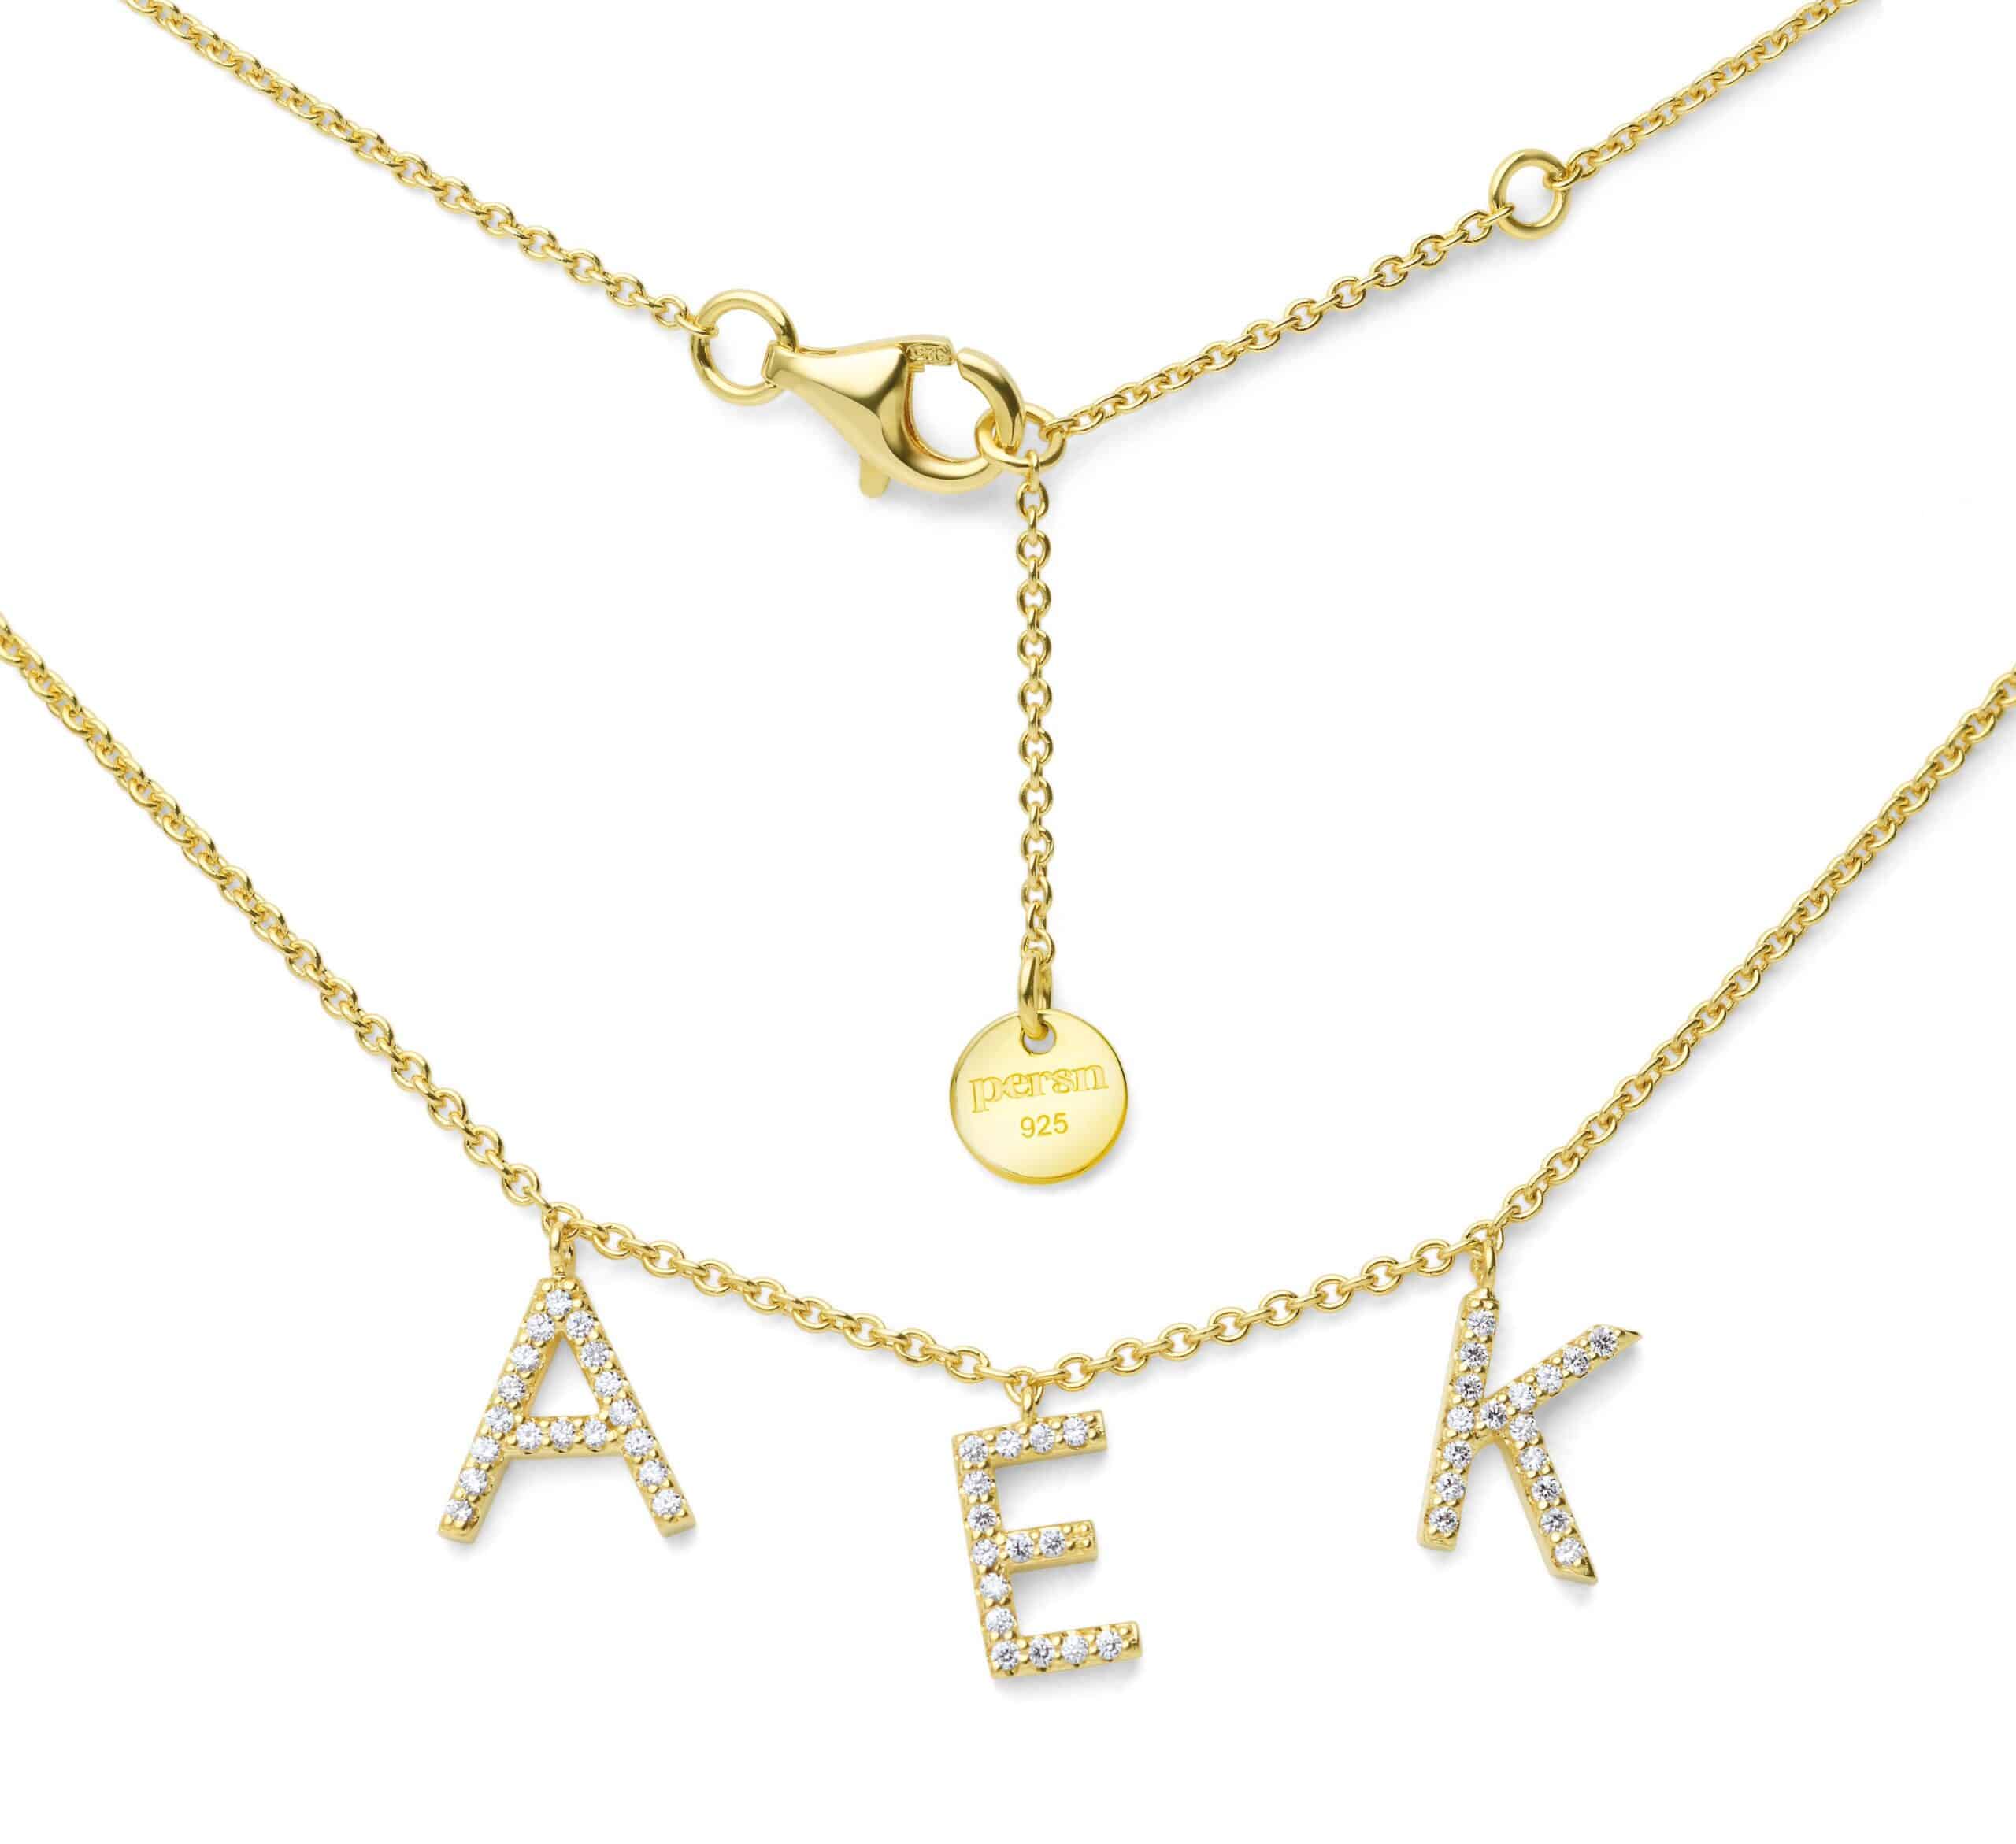 Necklaces with letters